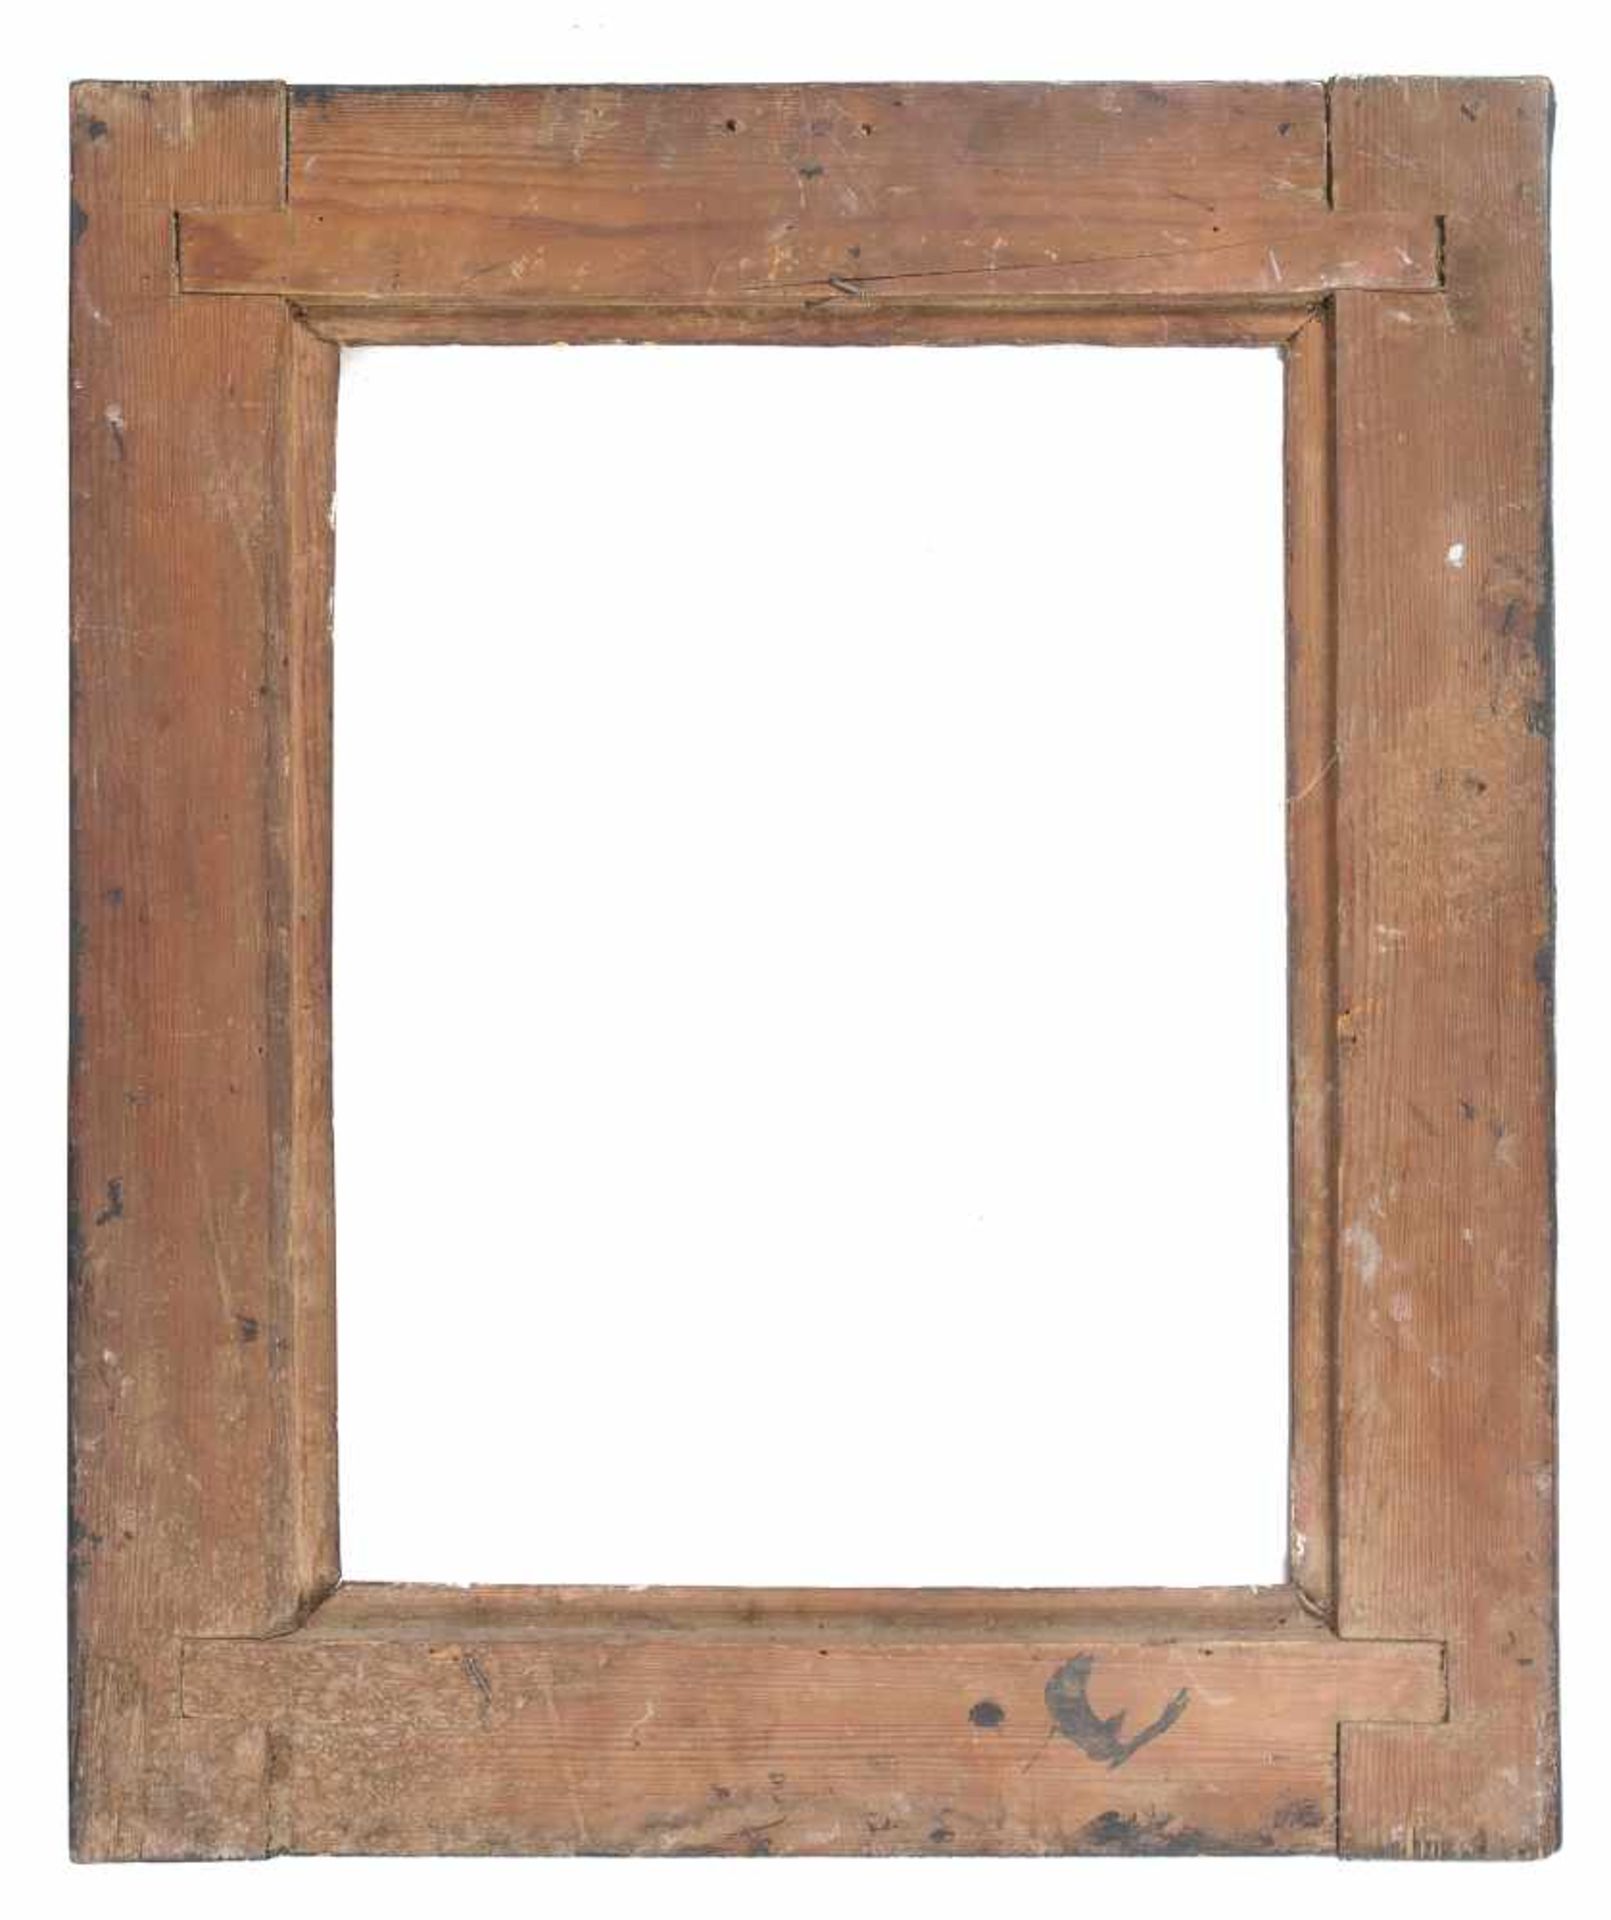 Carved, gilded and painted wooden frame. Majorca. 17th century. - Bild 3 aus 3